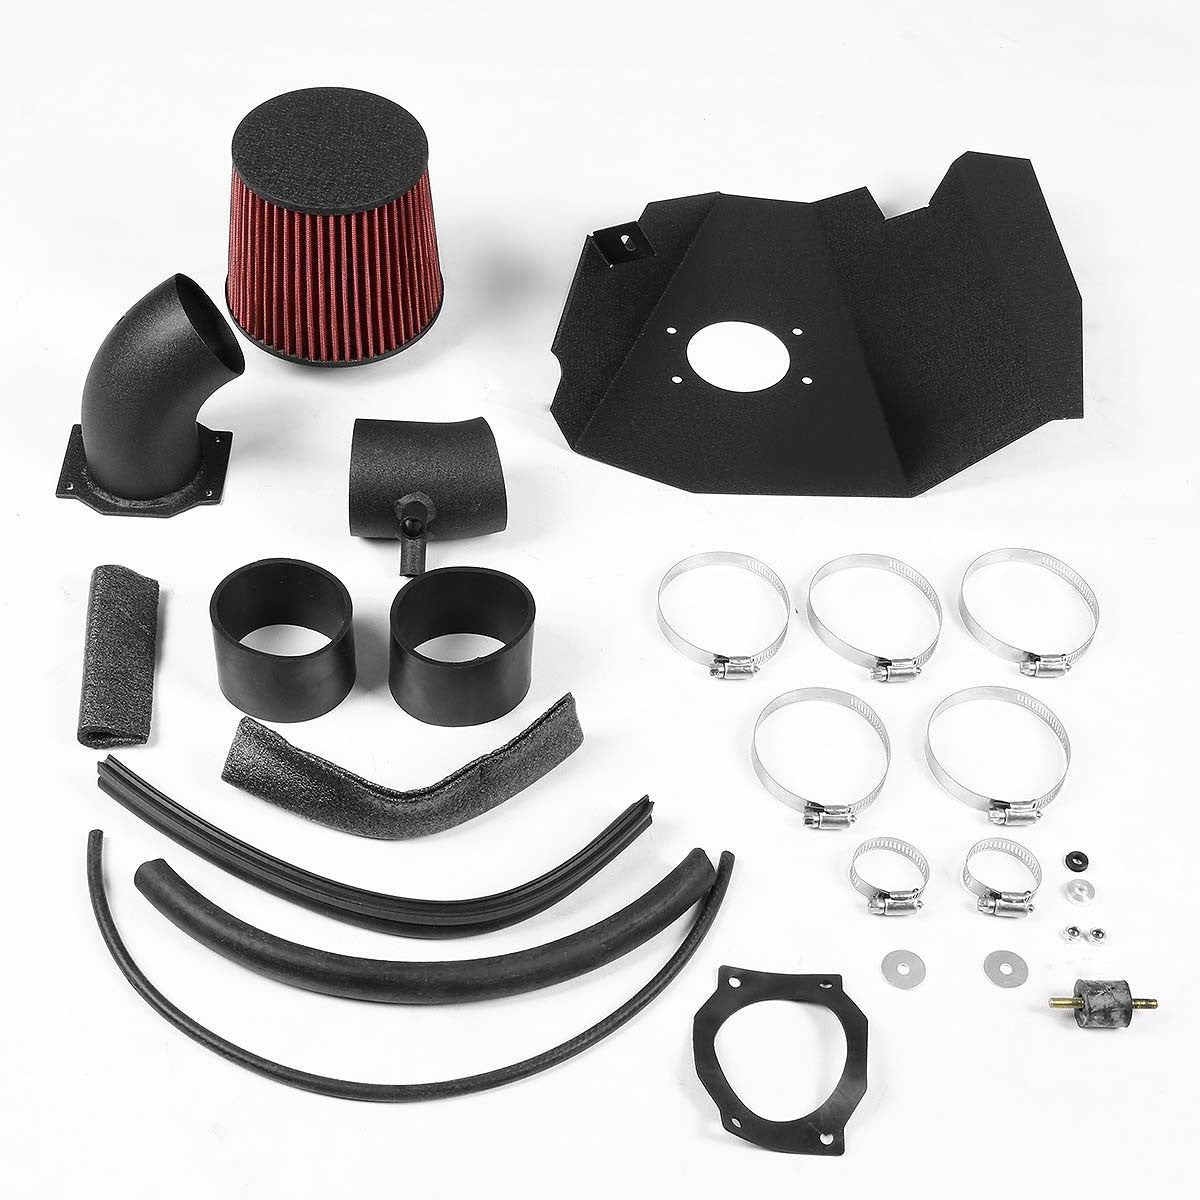 99-03 Nissan Frontier Xterra 3.3L V6 Black Cold Air Intake w/Heat Shield+Cone Filter